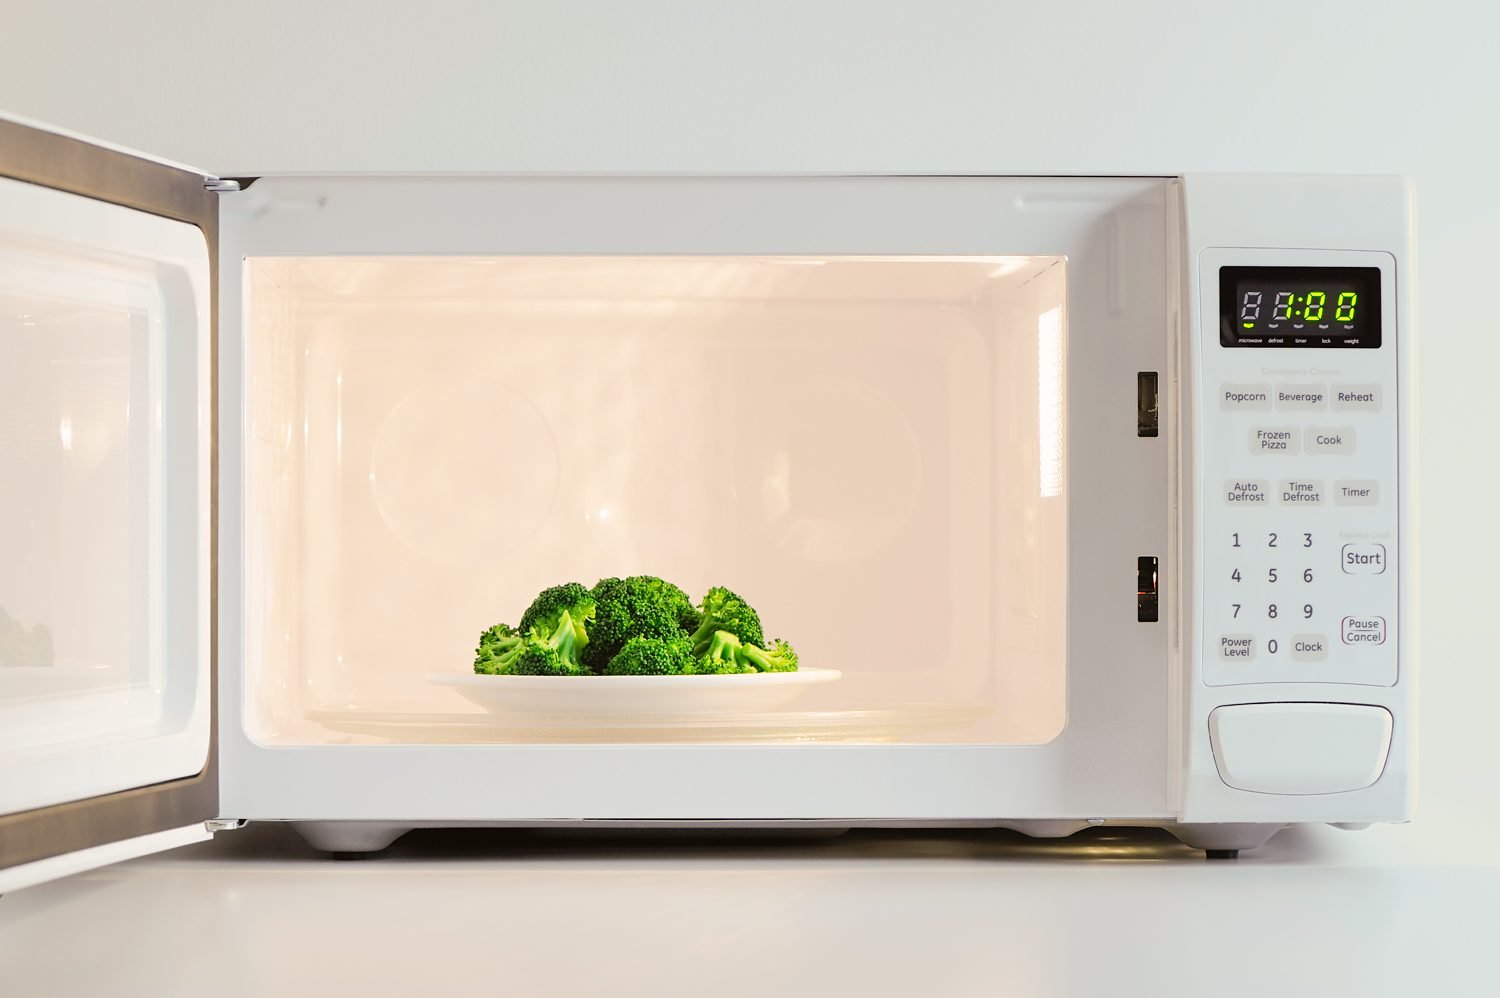 Everything you should know about the microwave food cover